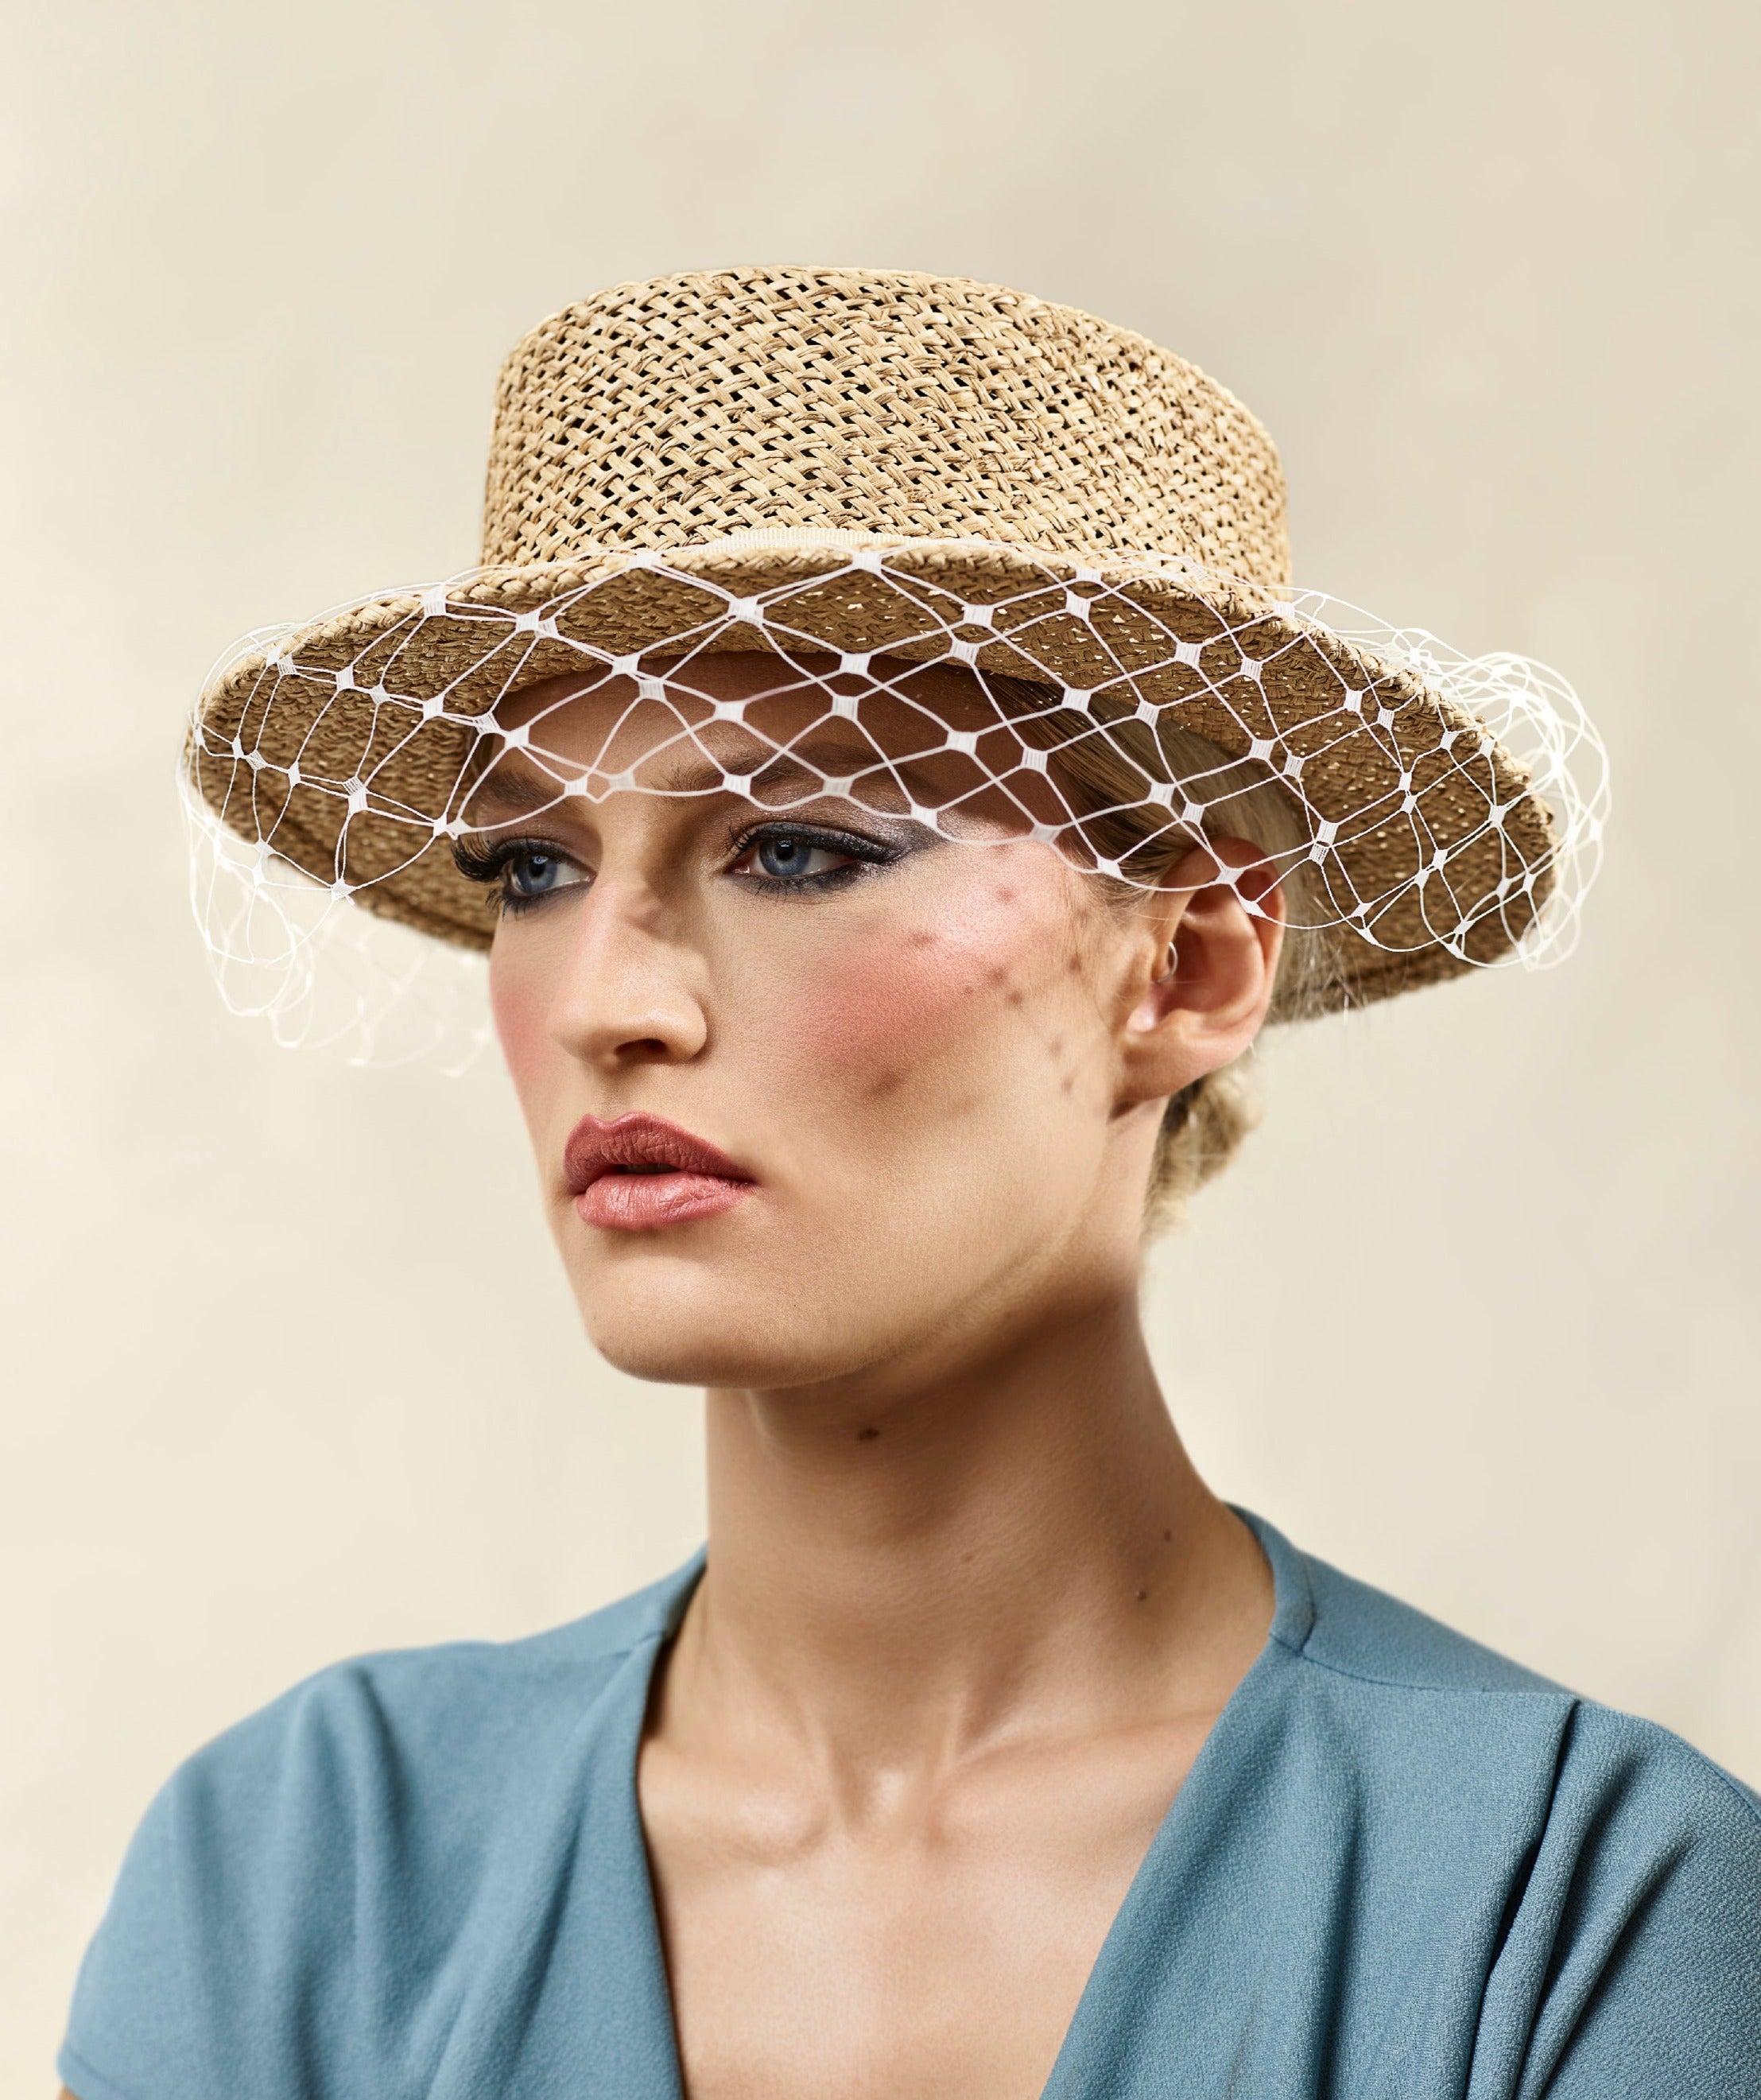 Misa Harada Hats| OLIVIA | Boater in maraca straw, wrapped with Ivory veil and grosgrain bow